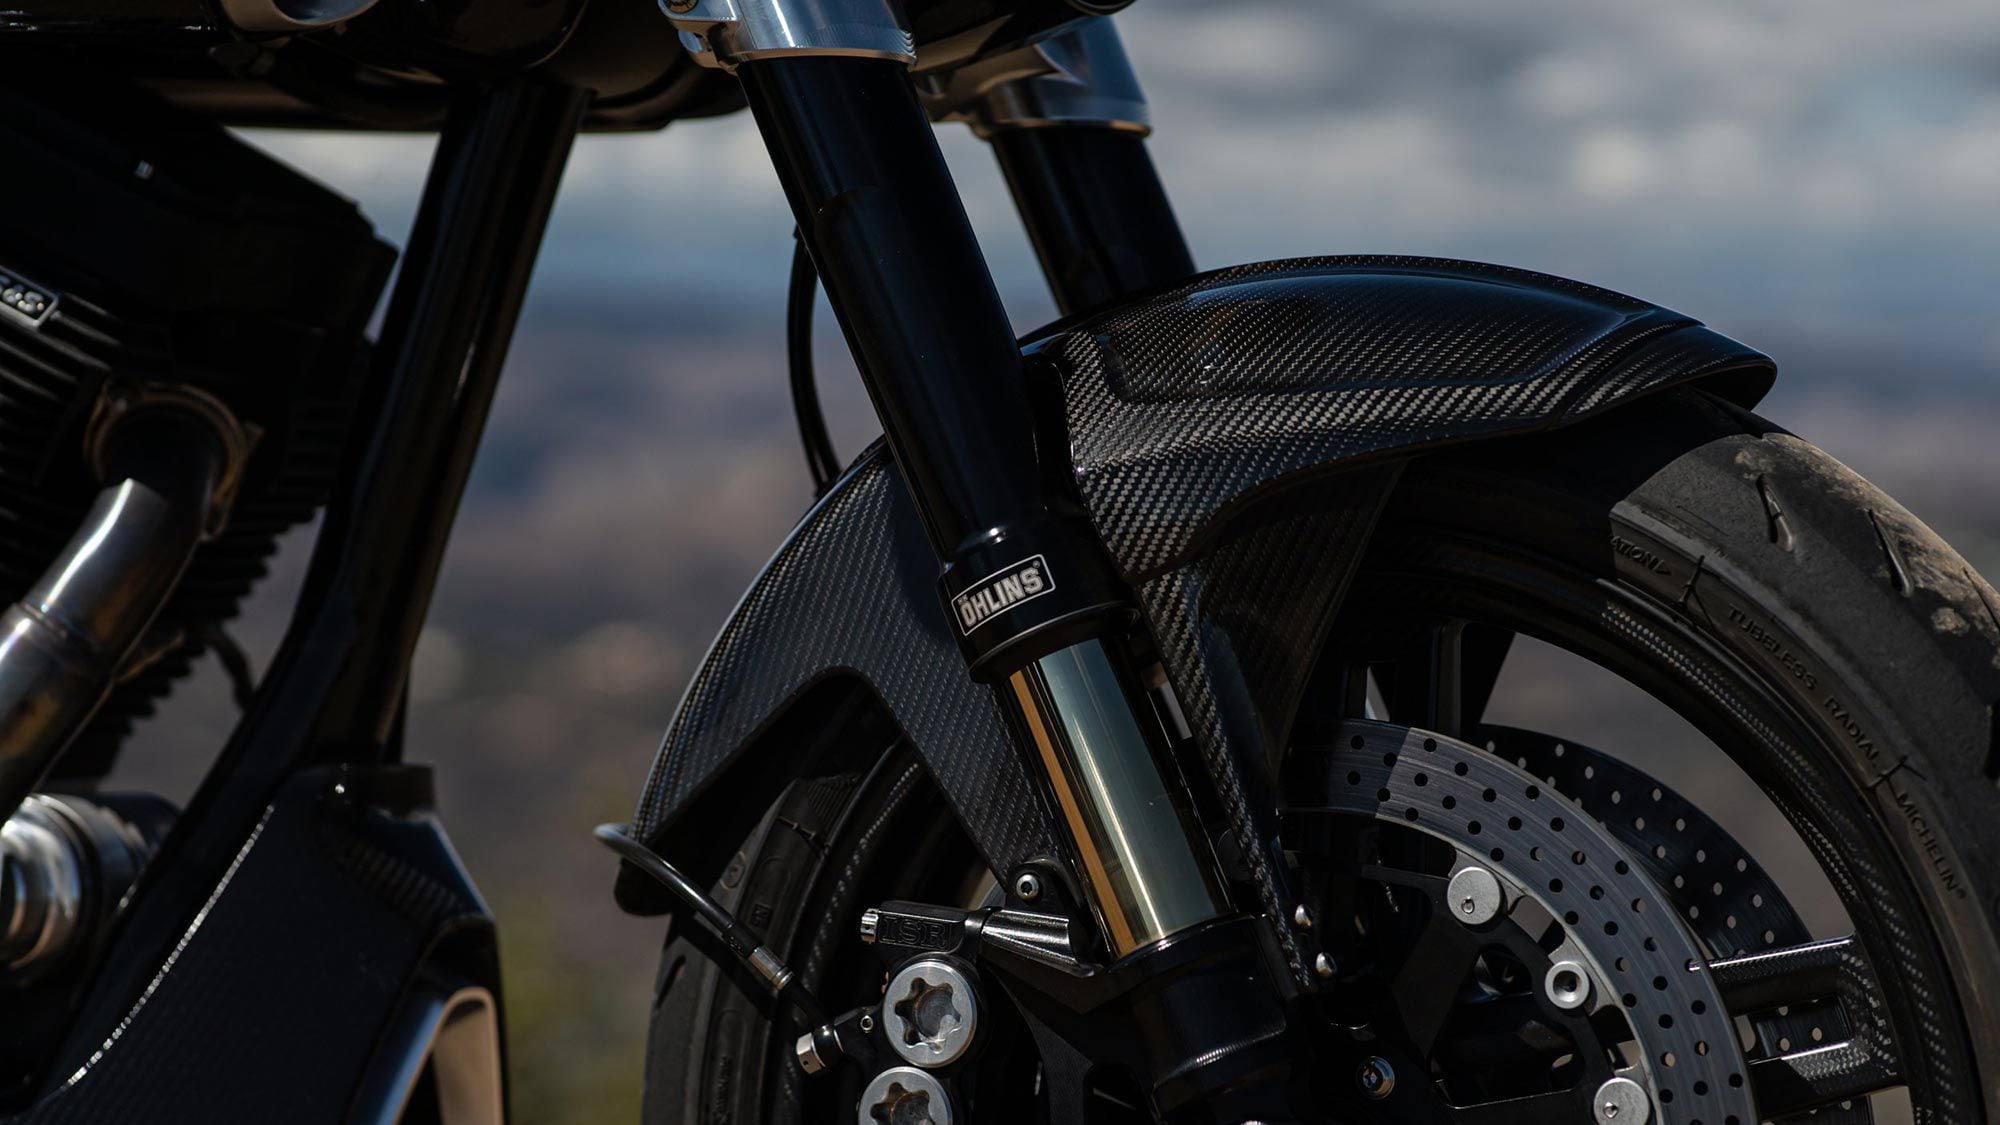 Arch worked with Öhlins Suspension to develop proprietary systems for both the KRGT-1 and the 1s.